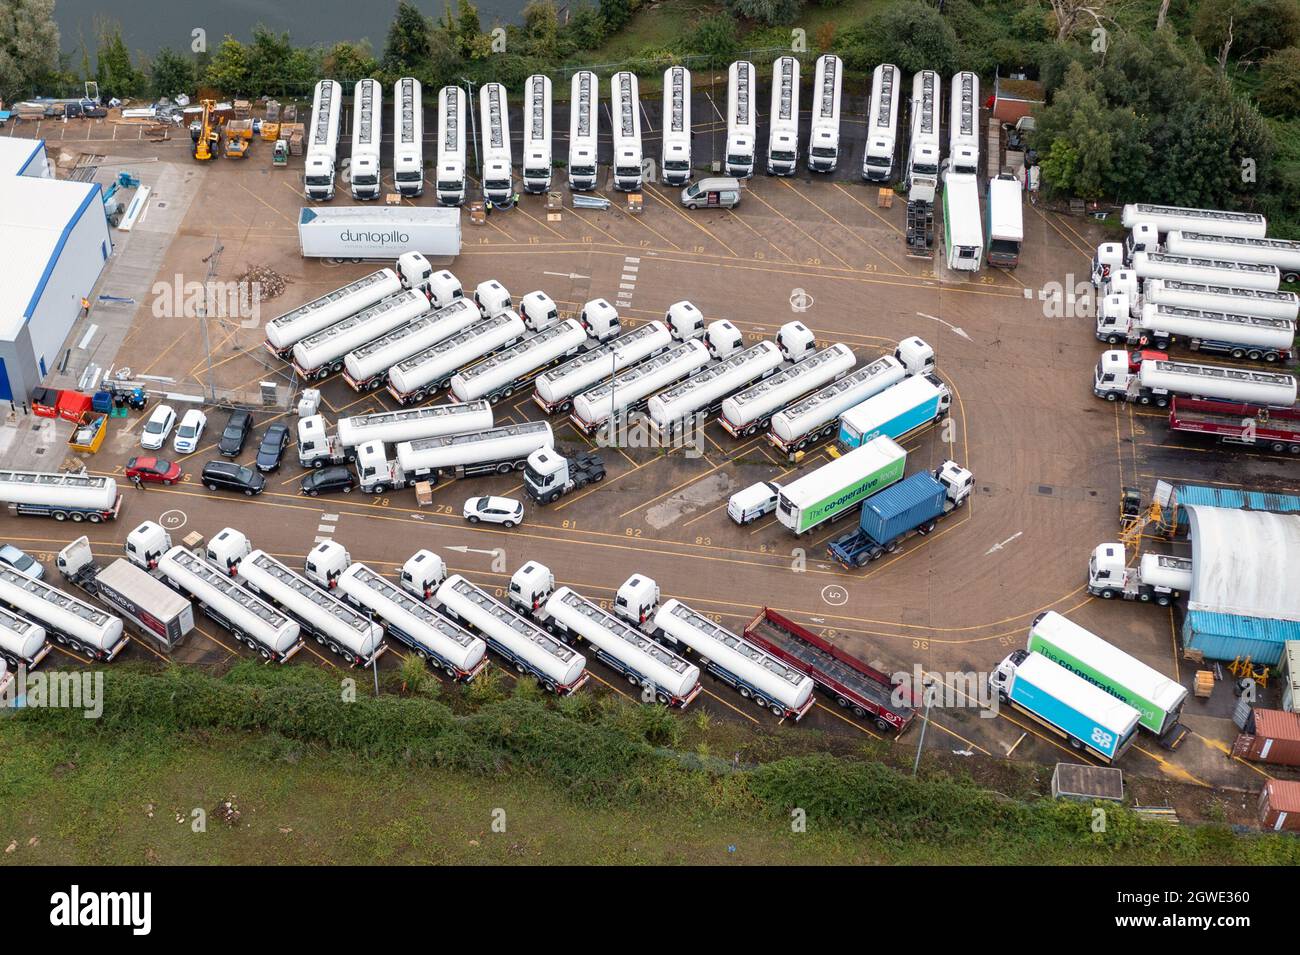 Picture dated October 1st shows the  governmentÕs reserve petrol tankers sitting in storage in Fenstanton,Cambridgeshire,on Friday morning despite the ongoing fuel crisis.Only a handful of the 40 tankers, worth an estimated £4 million, have been seen leaving this week.  The governmentÕs reserve petrol tankers are sitting in a storage yard in Cambridgeshire this morning (Fri) as the fuel crisis continues.  Around 40 tankers, worth an estimated £4 million, are parked in the storage depot in Fenstanton, whilst forecourts across the UK remain closed due to a shortage of truck drivers. Stock Photo